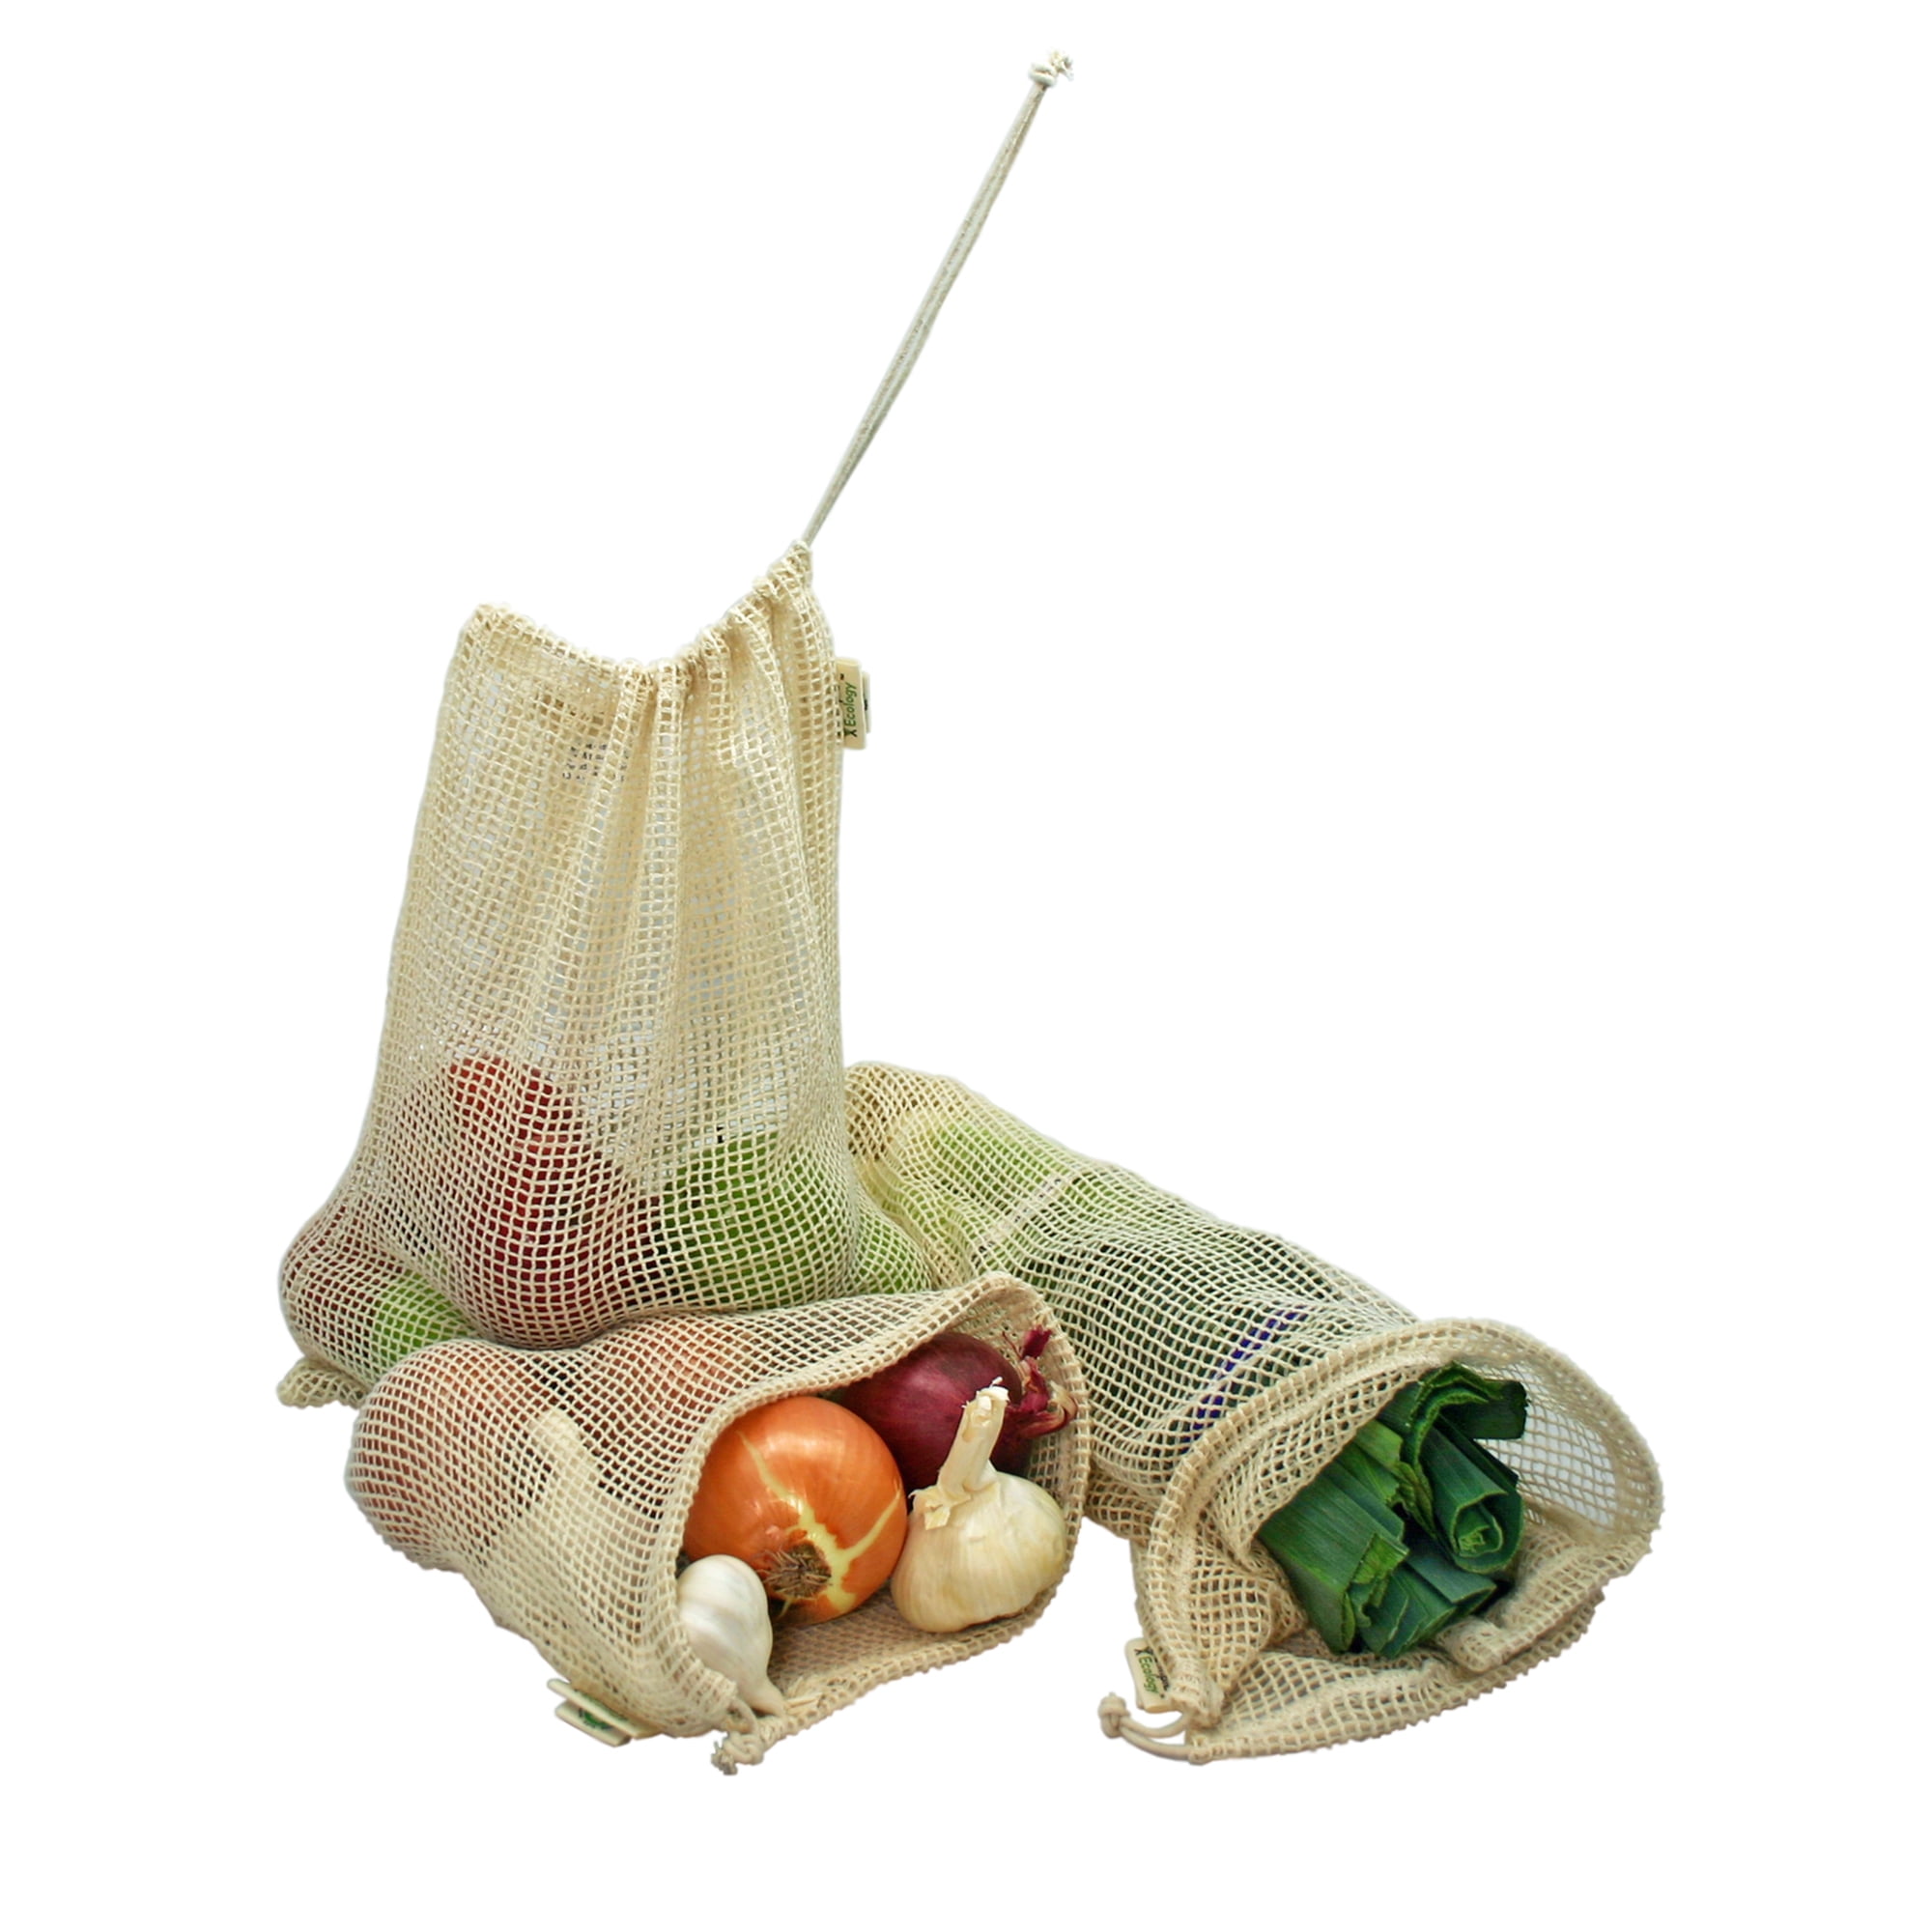 Reusable Cotton Mesh Produce Bags Natural Durable Cotton See-Through Mesh Produce Bags with Tare Weight on Tags Eco Friendly Recyclable Packaging Bags for Grocery Shopping & Storage Set of 6